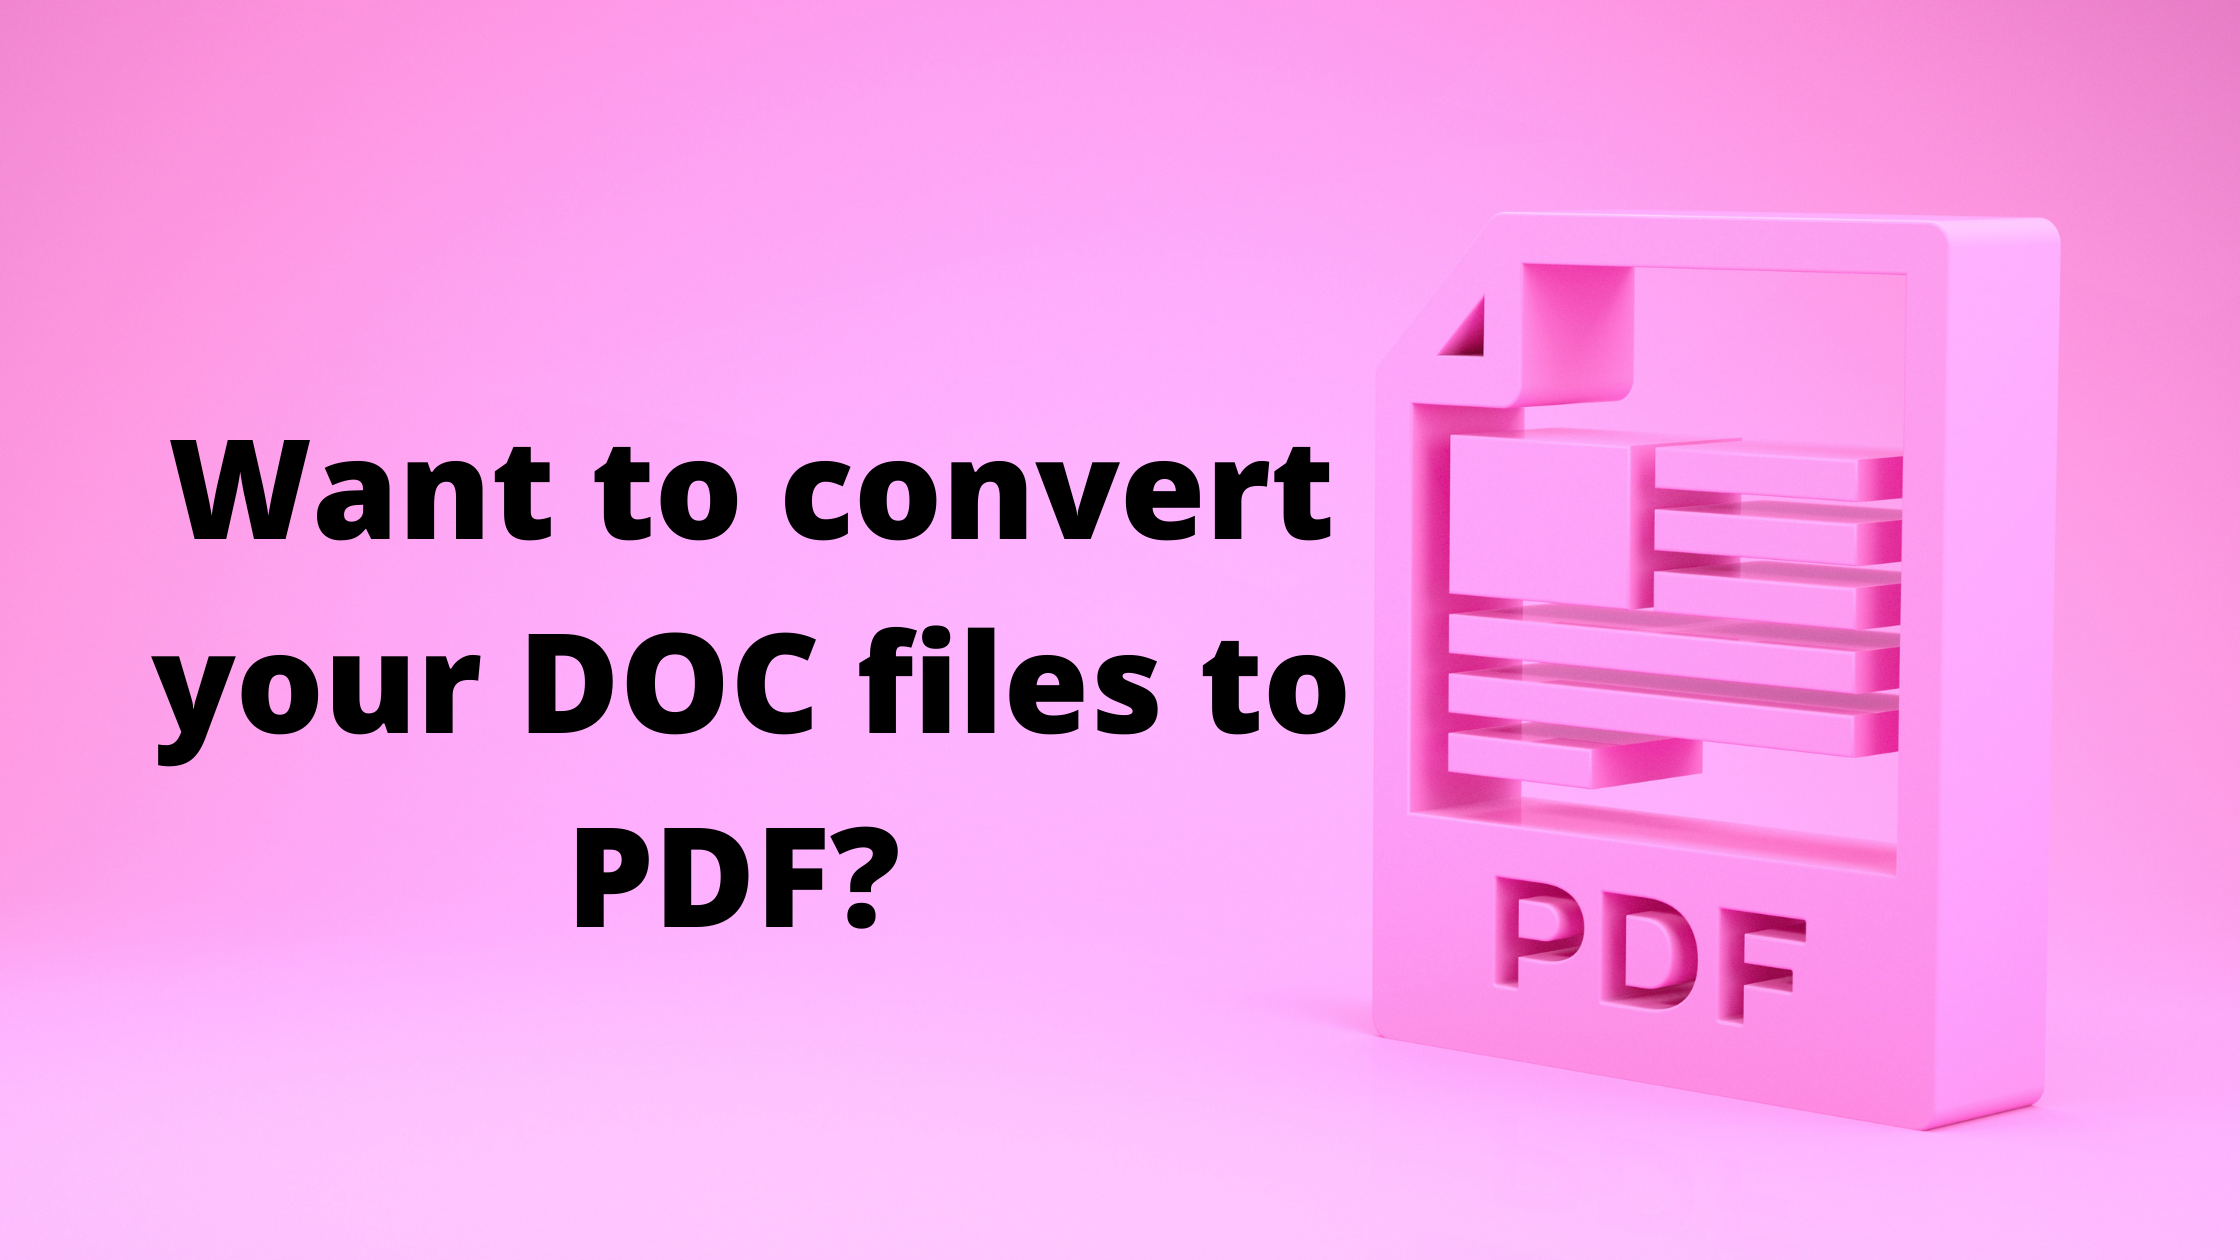 Want to convert your DOC files to PDF?